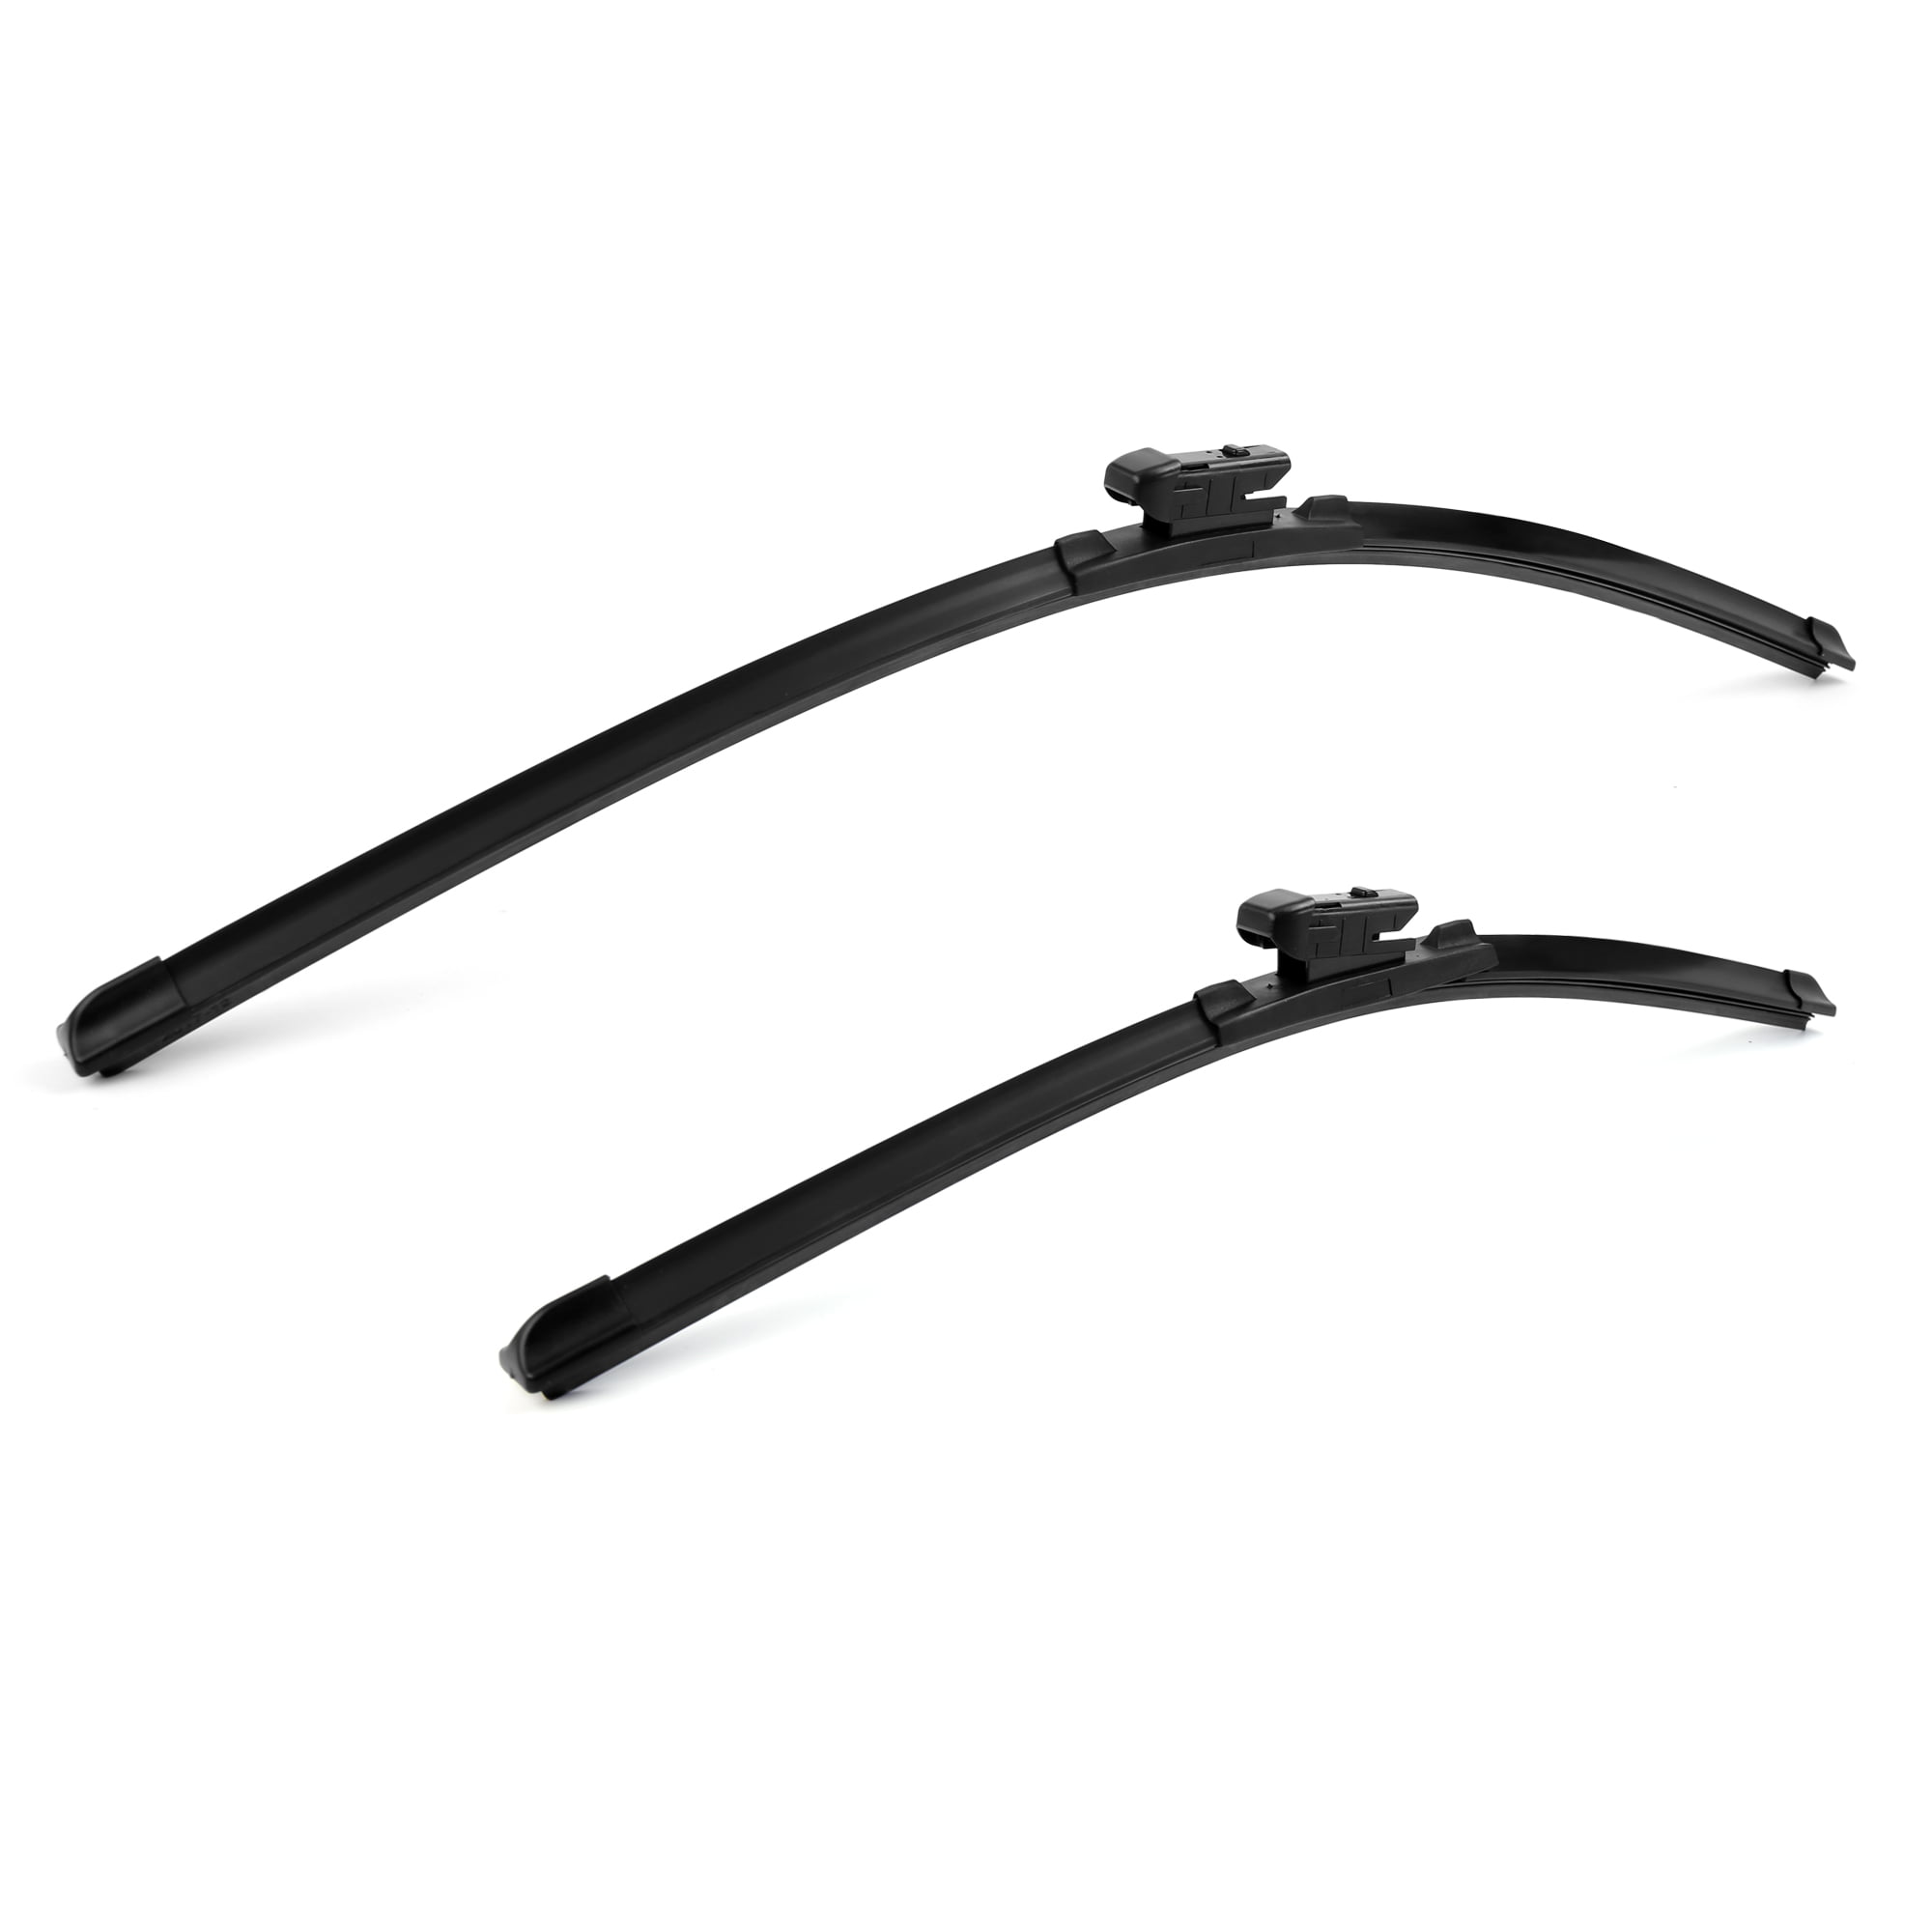 24"+18" Front Windshield Wiper Blades for 2017-2019 Mazda CX-5 CX-9 (Not for J Hook Adapter 2018 Mazda Cx 5 Wiper Blade Replacement